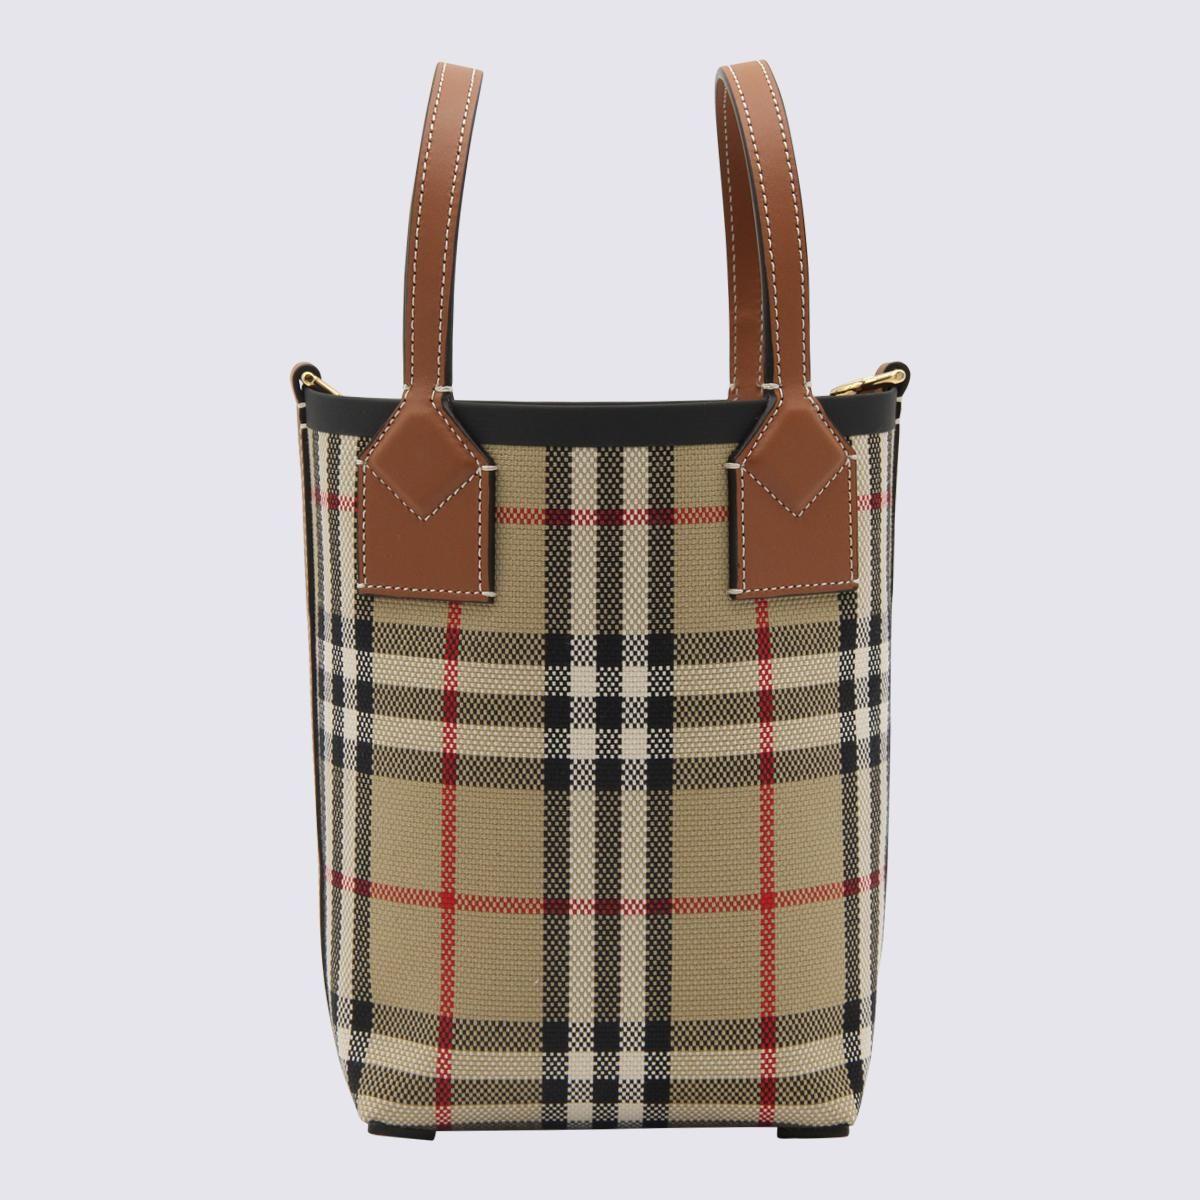 Burberry Mini Check Bowling Bag - Archive Beige